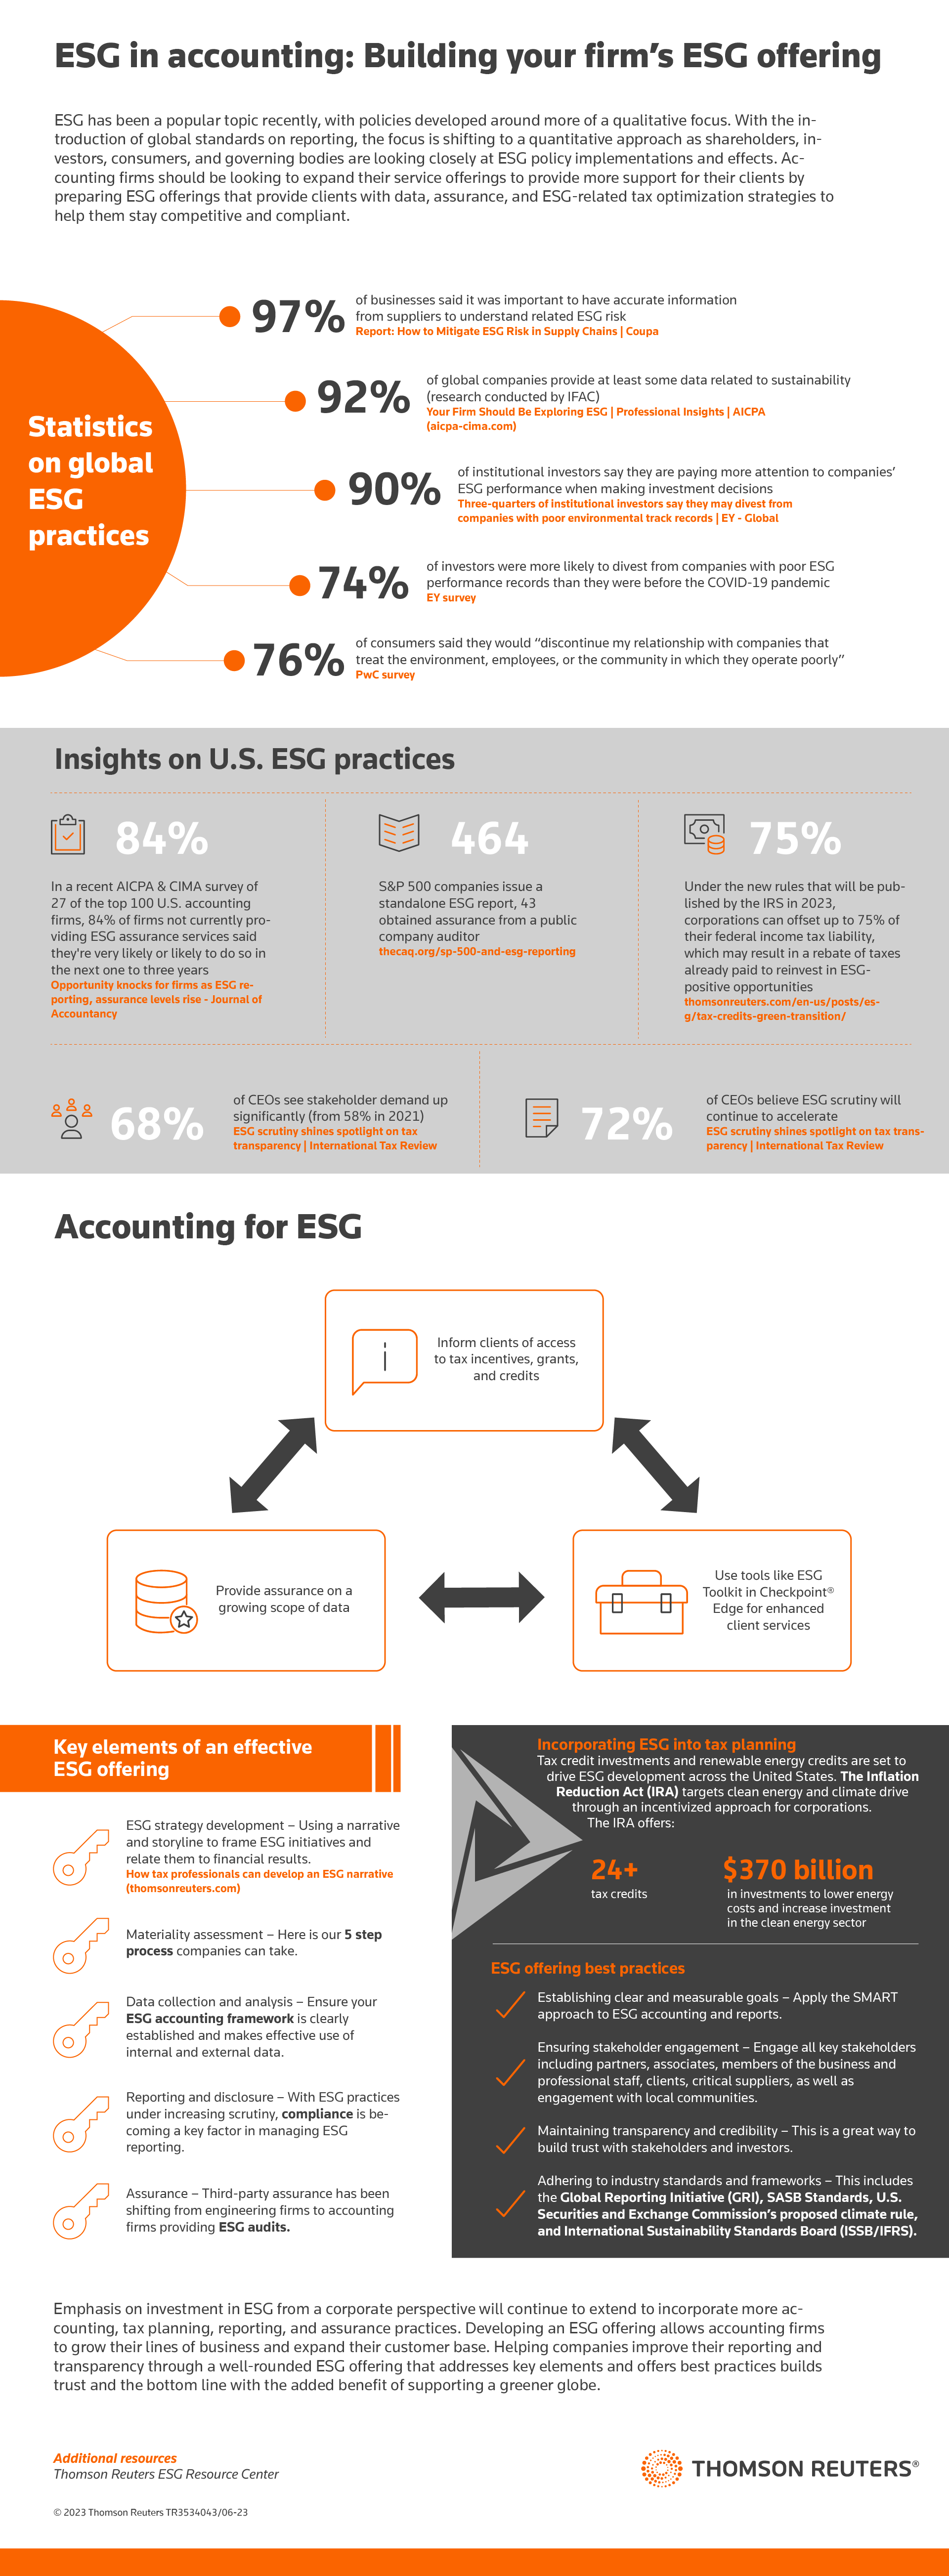 An infographic focused on ESG in accounting